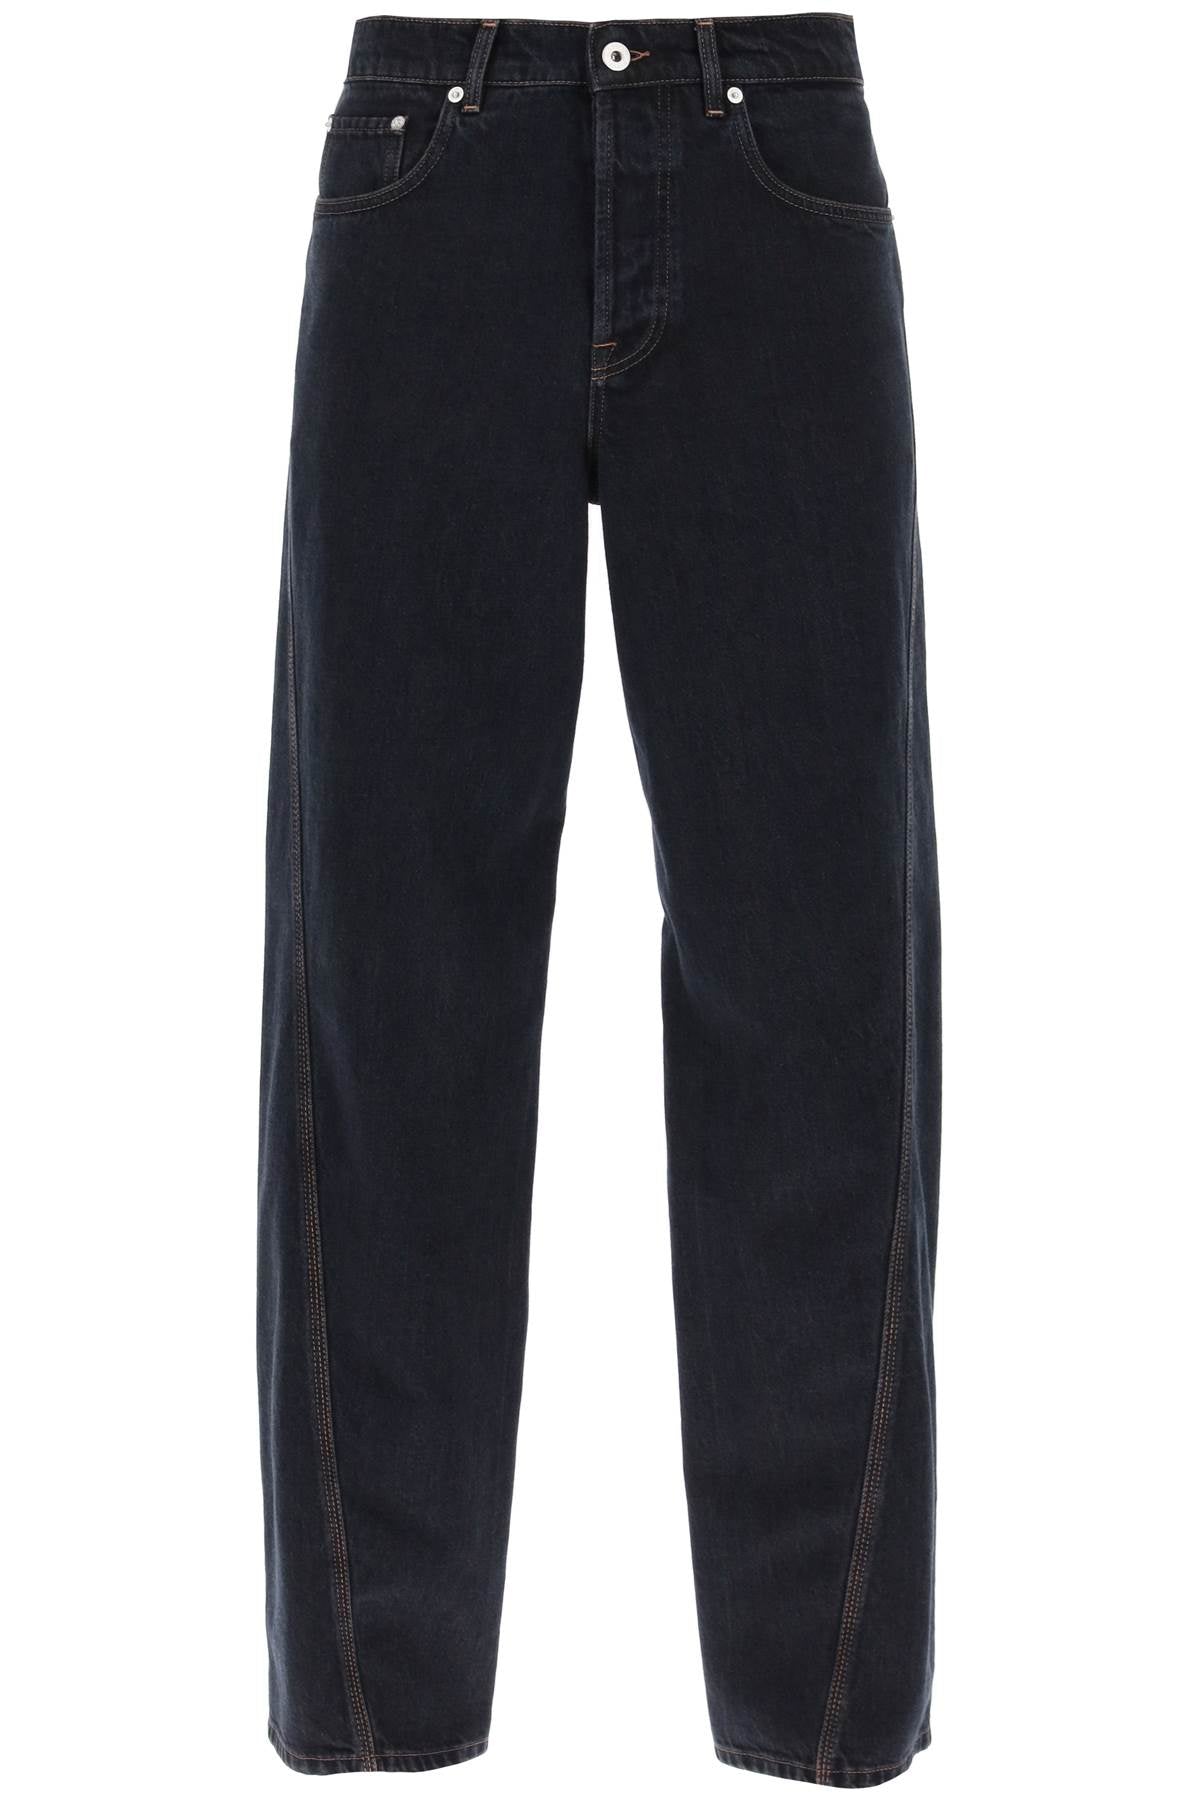 Lanvin Men's Dark Wash Baggy Jeans With Twisted Seams In Blue